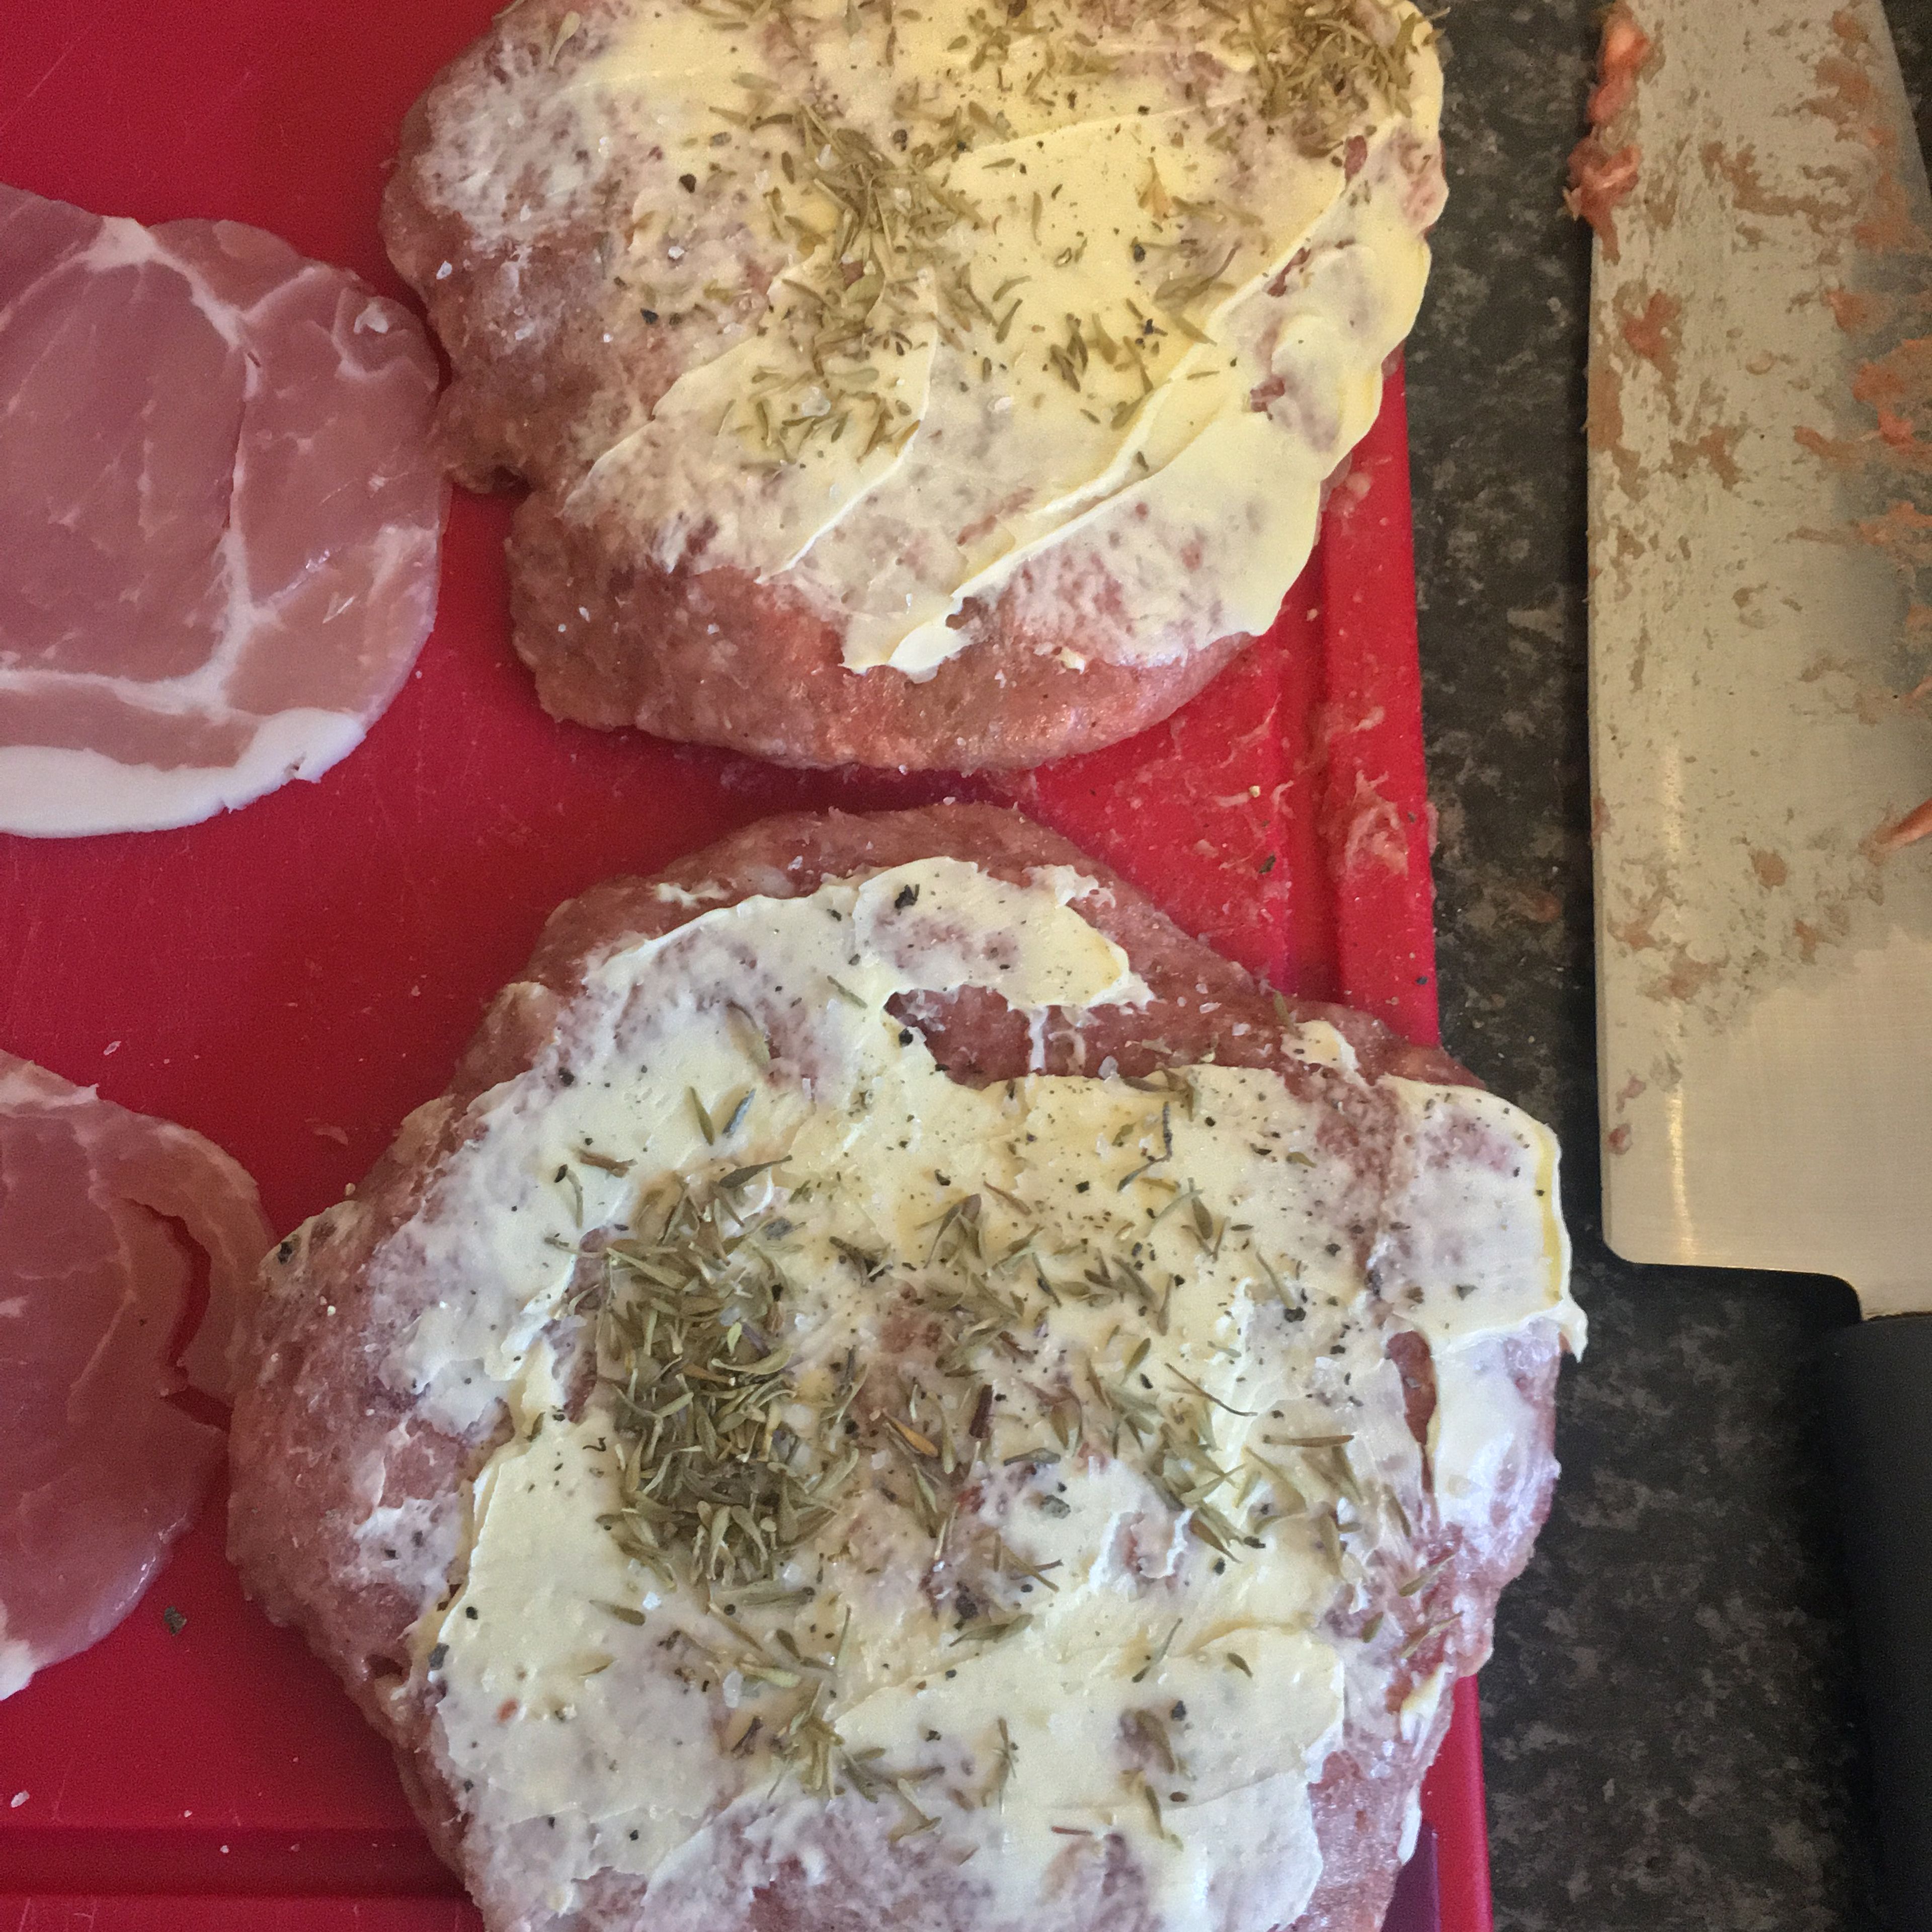 On the chopping board, butter the tops of the burgers then season with salt, pepper and a herb of your choosing (I used Thyme in this recipe).